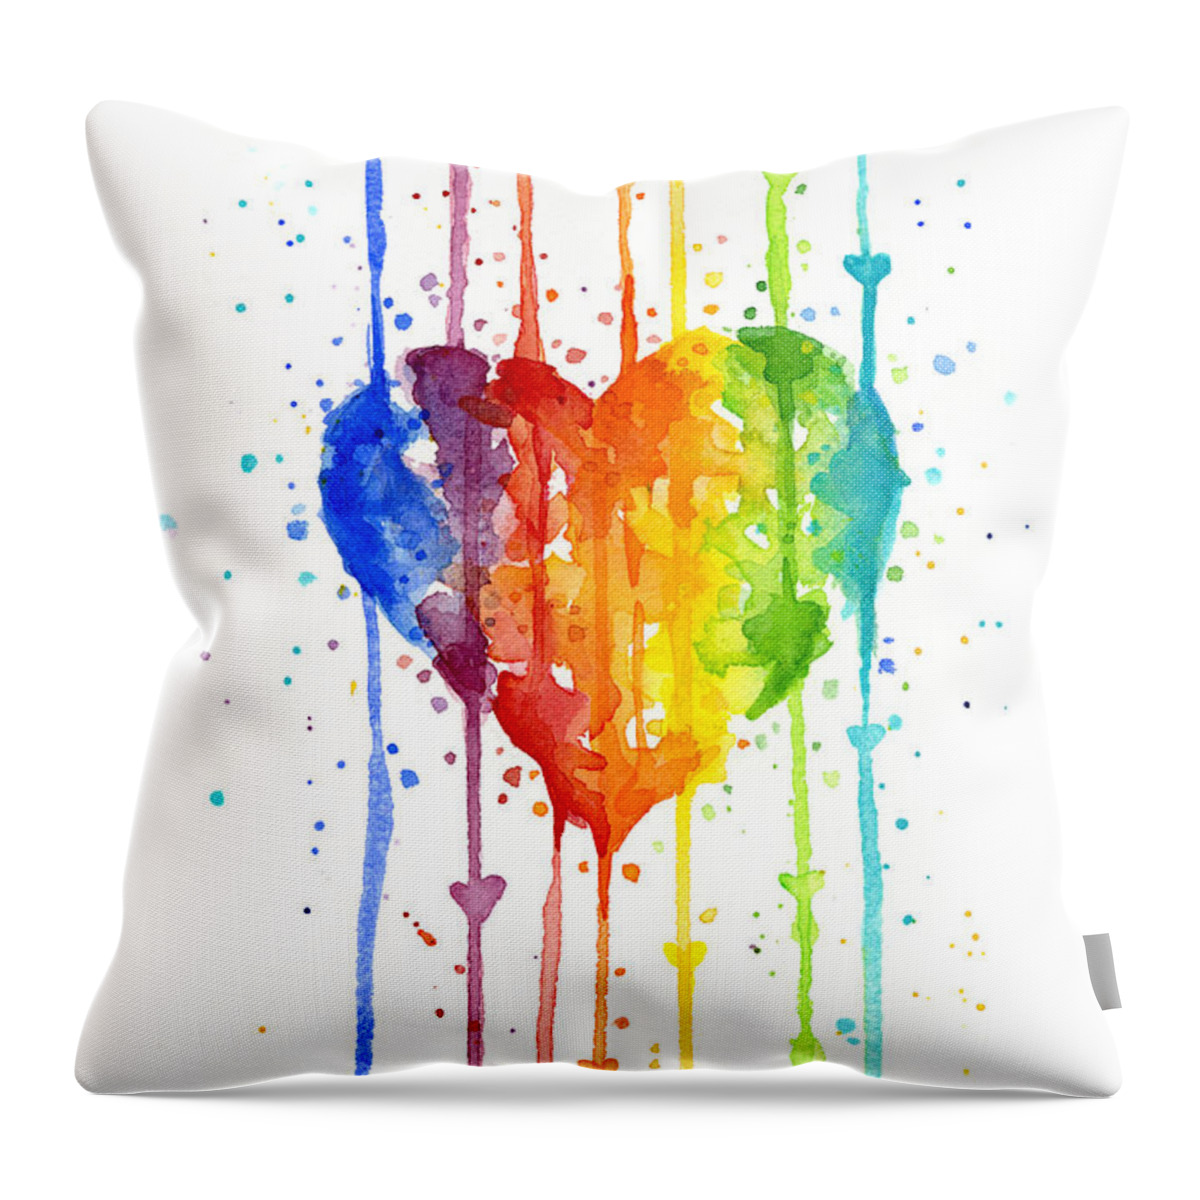 Heart Throw Pillow featuring the painting Rainbow Watercolor Heart by Olga Shvartsur